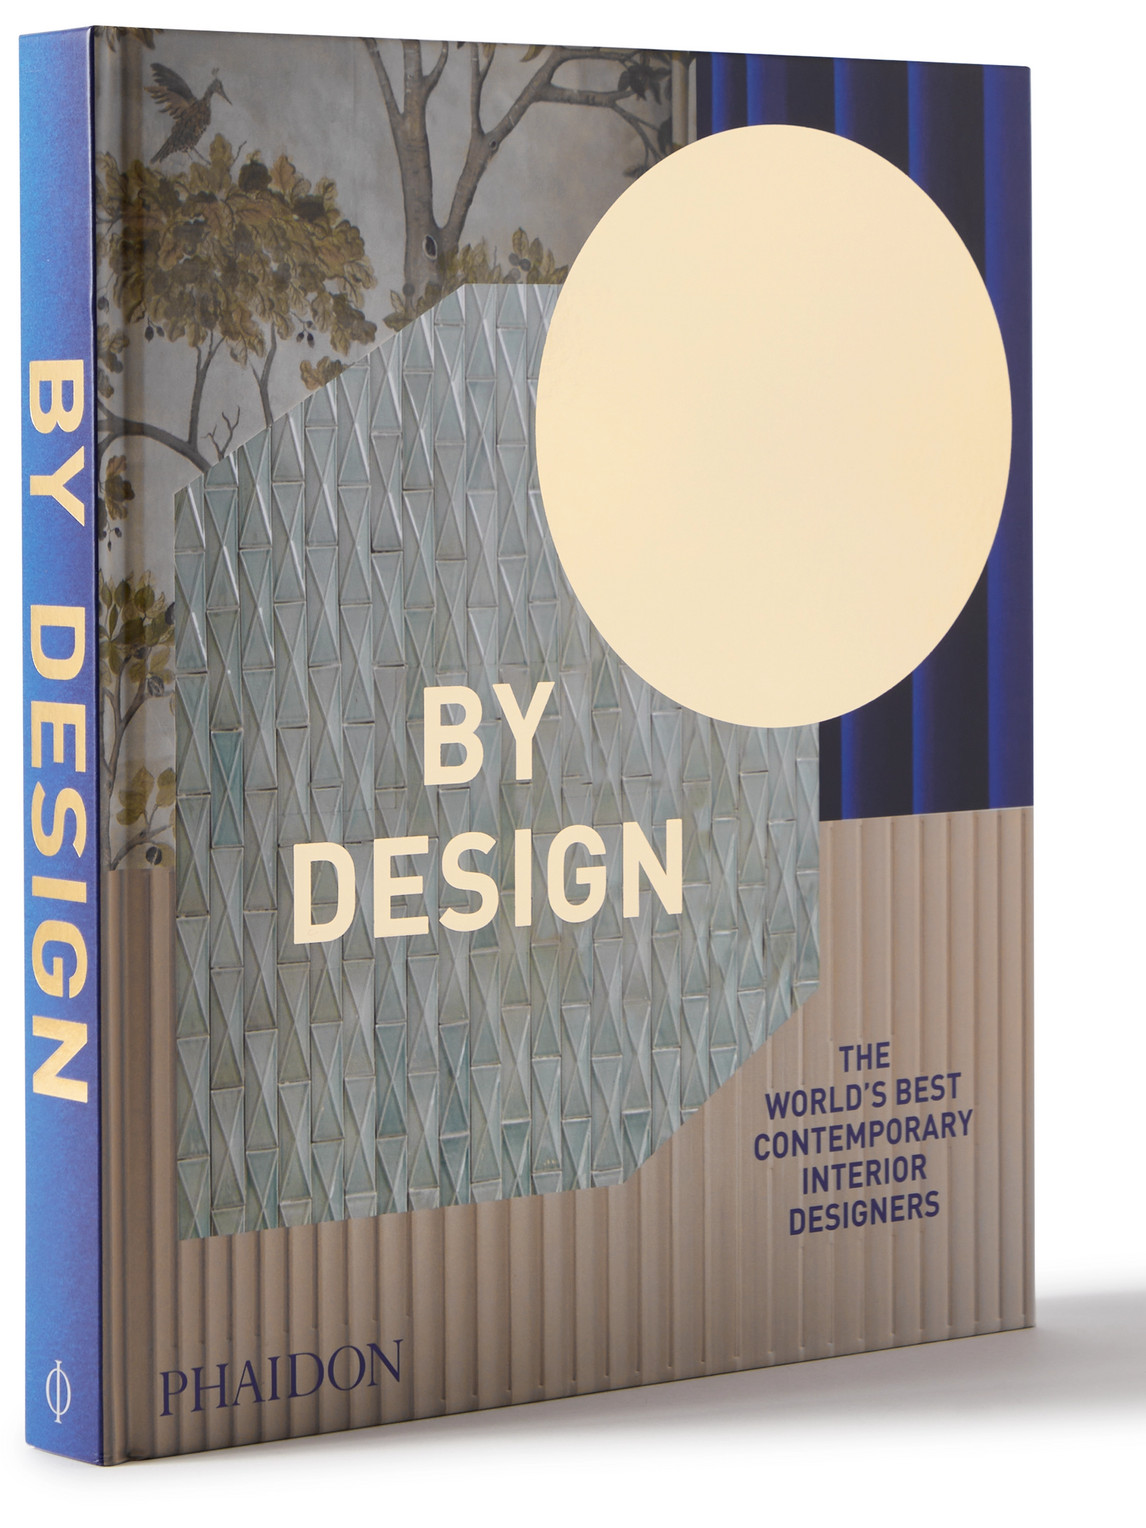 Phaidon By Design: The World's Best Contemporary Interior Designers Hardcover Book In Blue